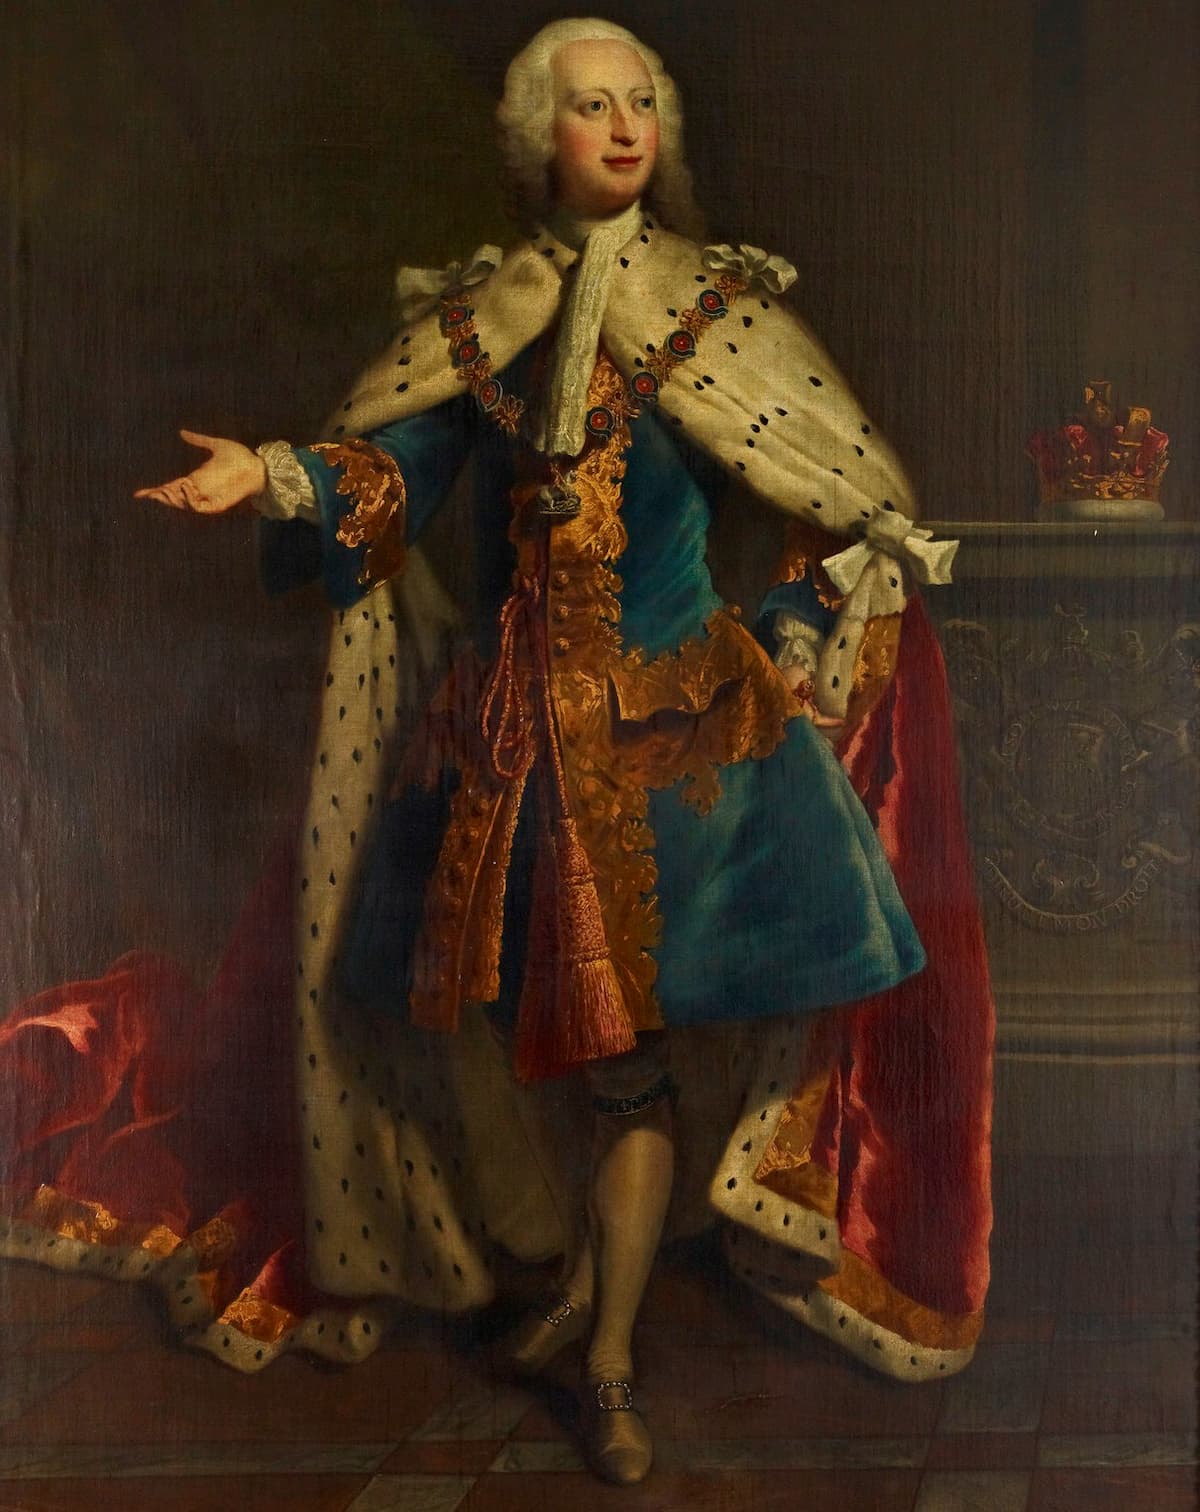 Frederick, Prince of Wales attr. to Joseph Highmore